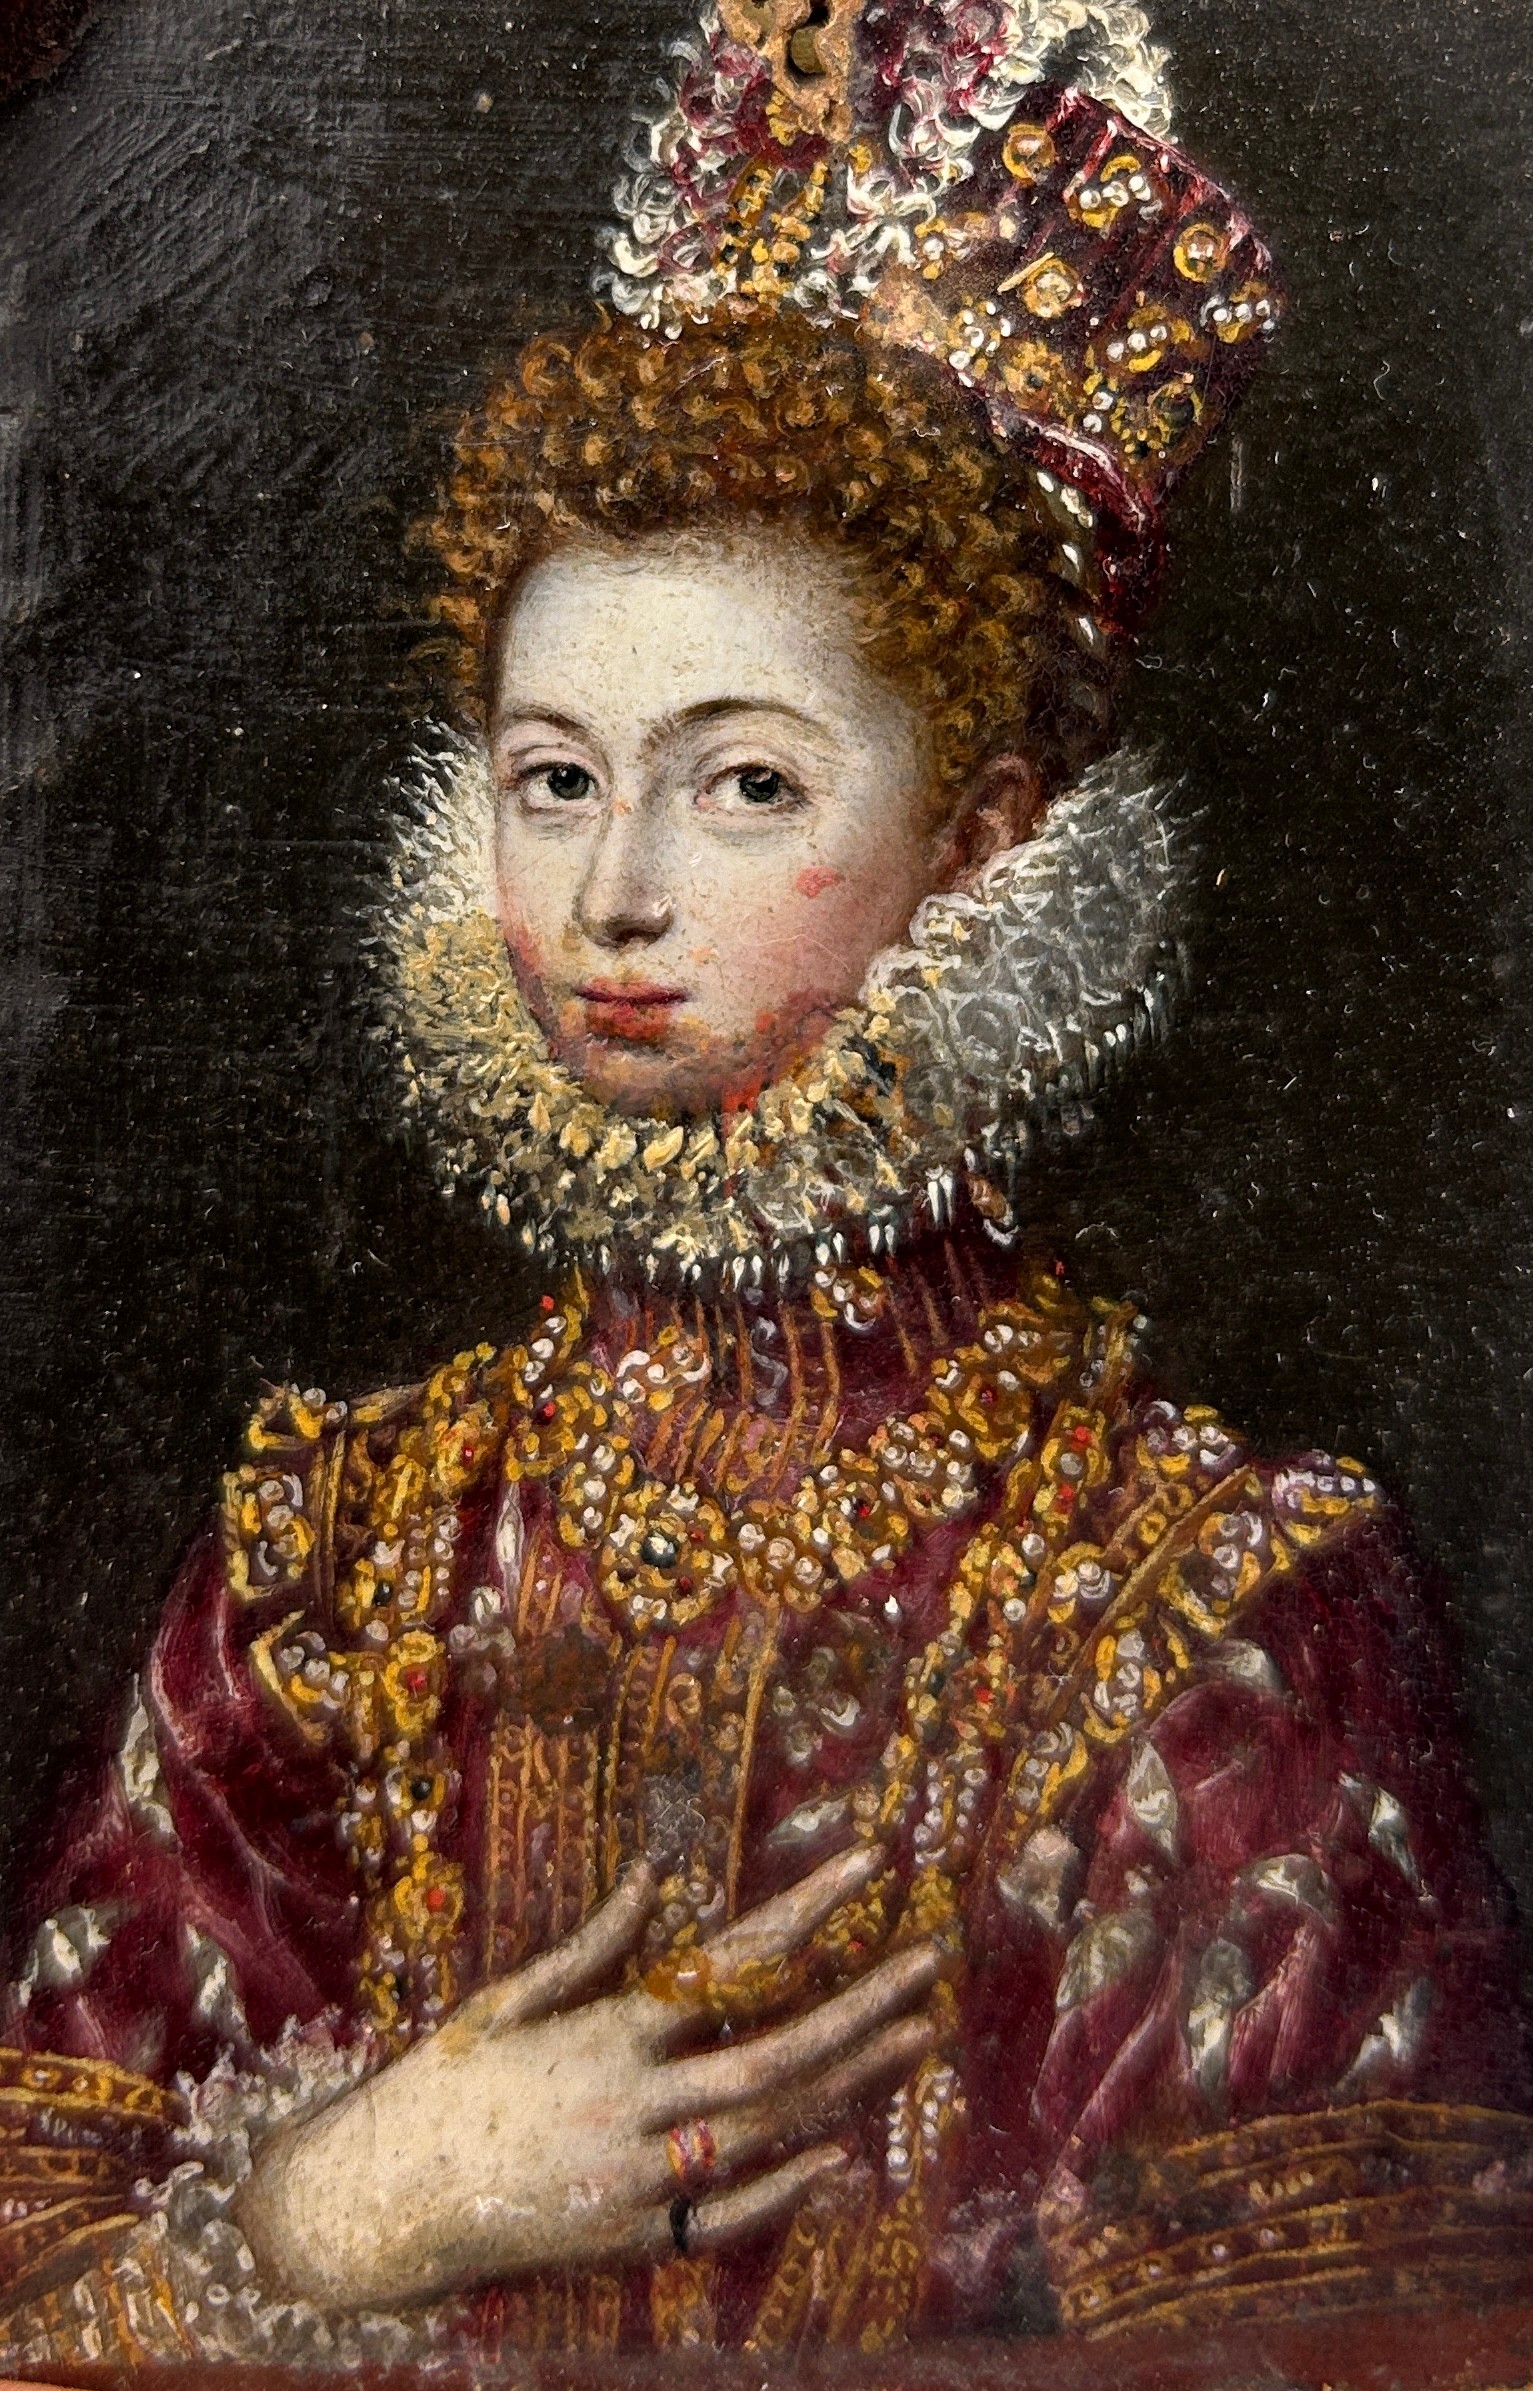 EARLY 17TH CENTURY SPANISH SCHOOL: MINIATURE PORTRAIT PAINTING PROBABLY DEPICTING ISABELLA CLARA